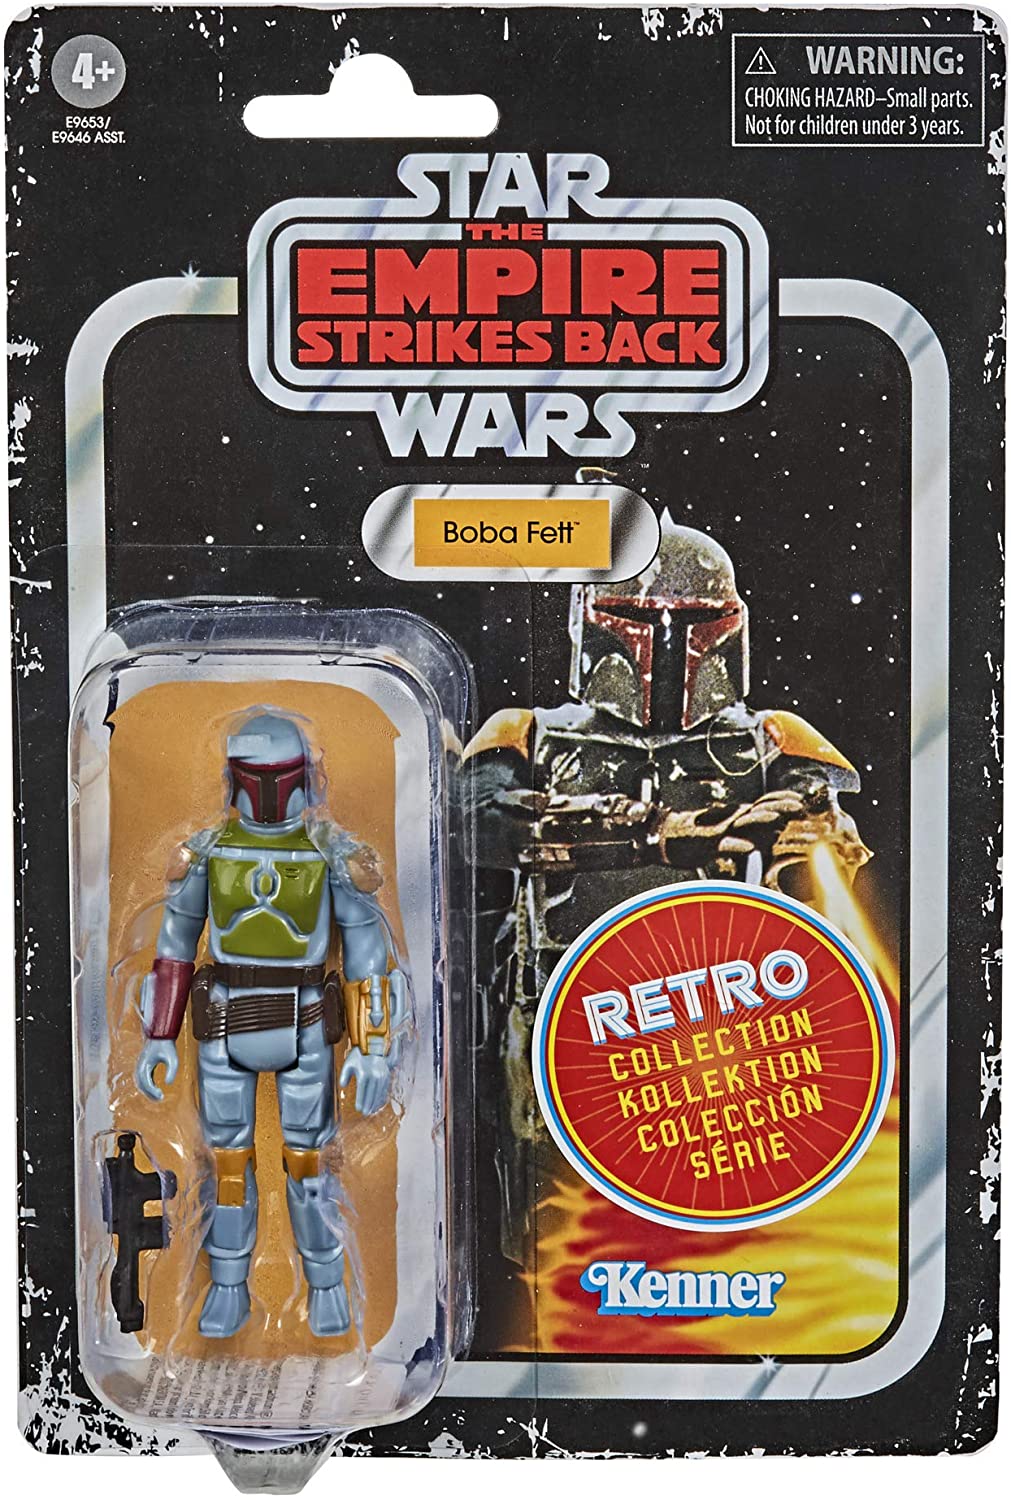 Phillips Toys now has in stock the Star Wars The Empire Strikes Back Retro Collection 3.75 Inch scale action figure set